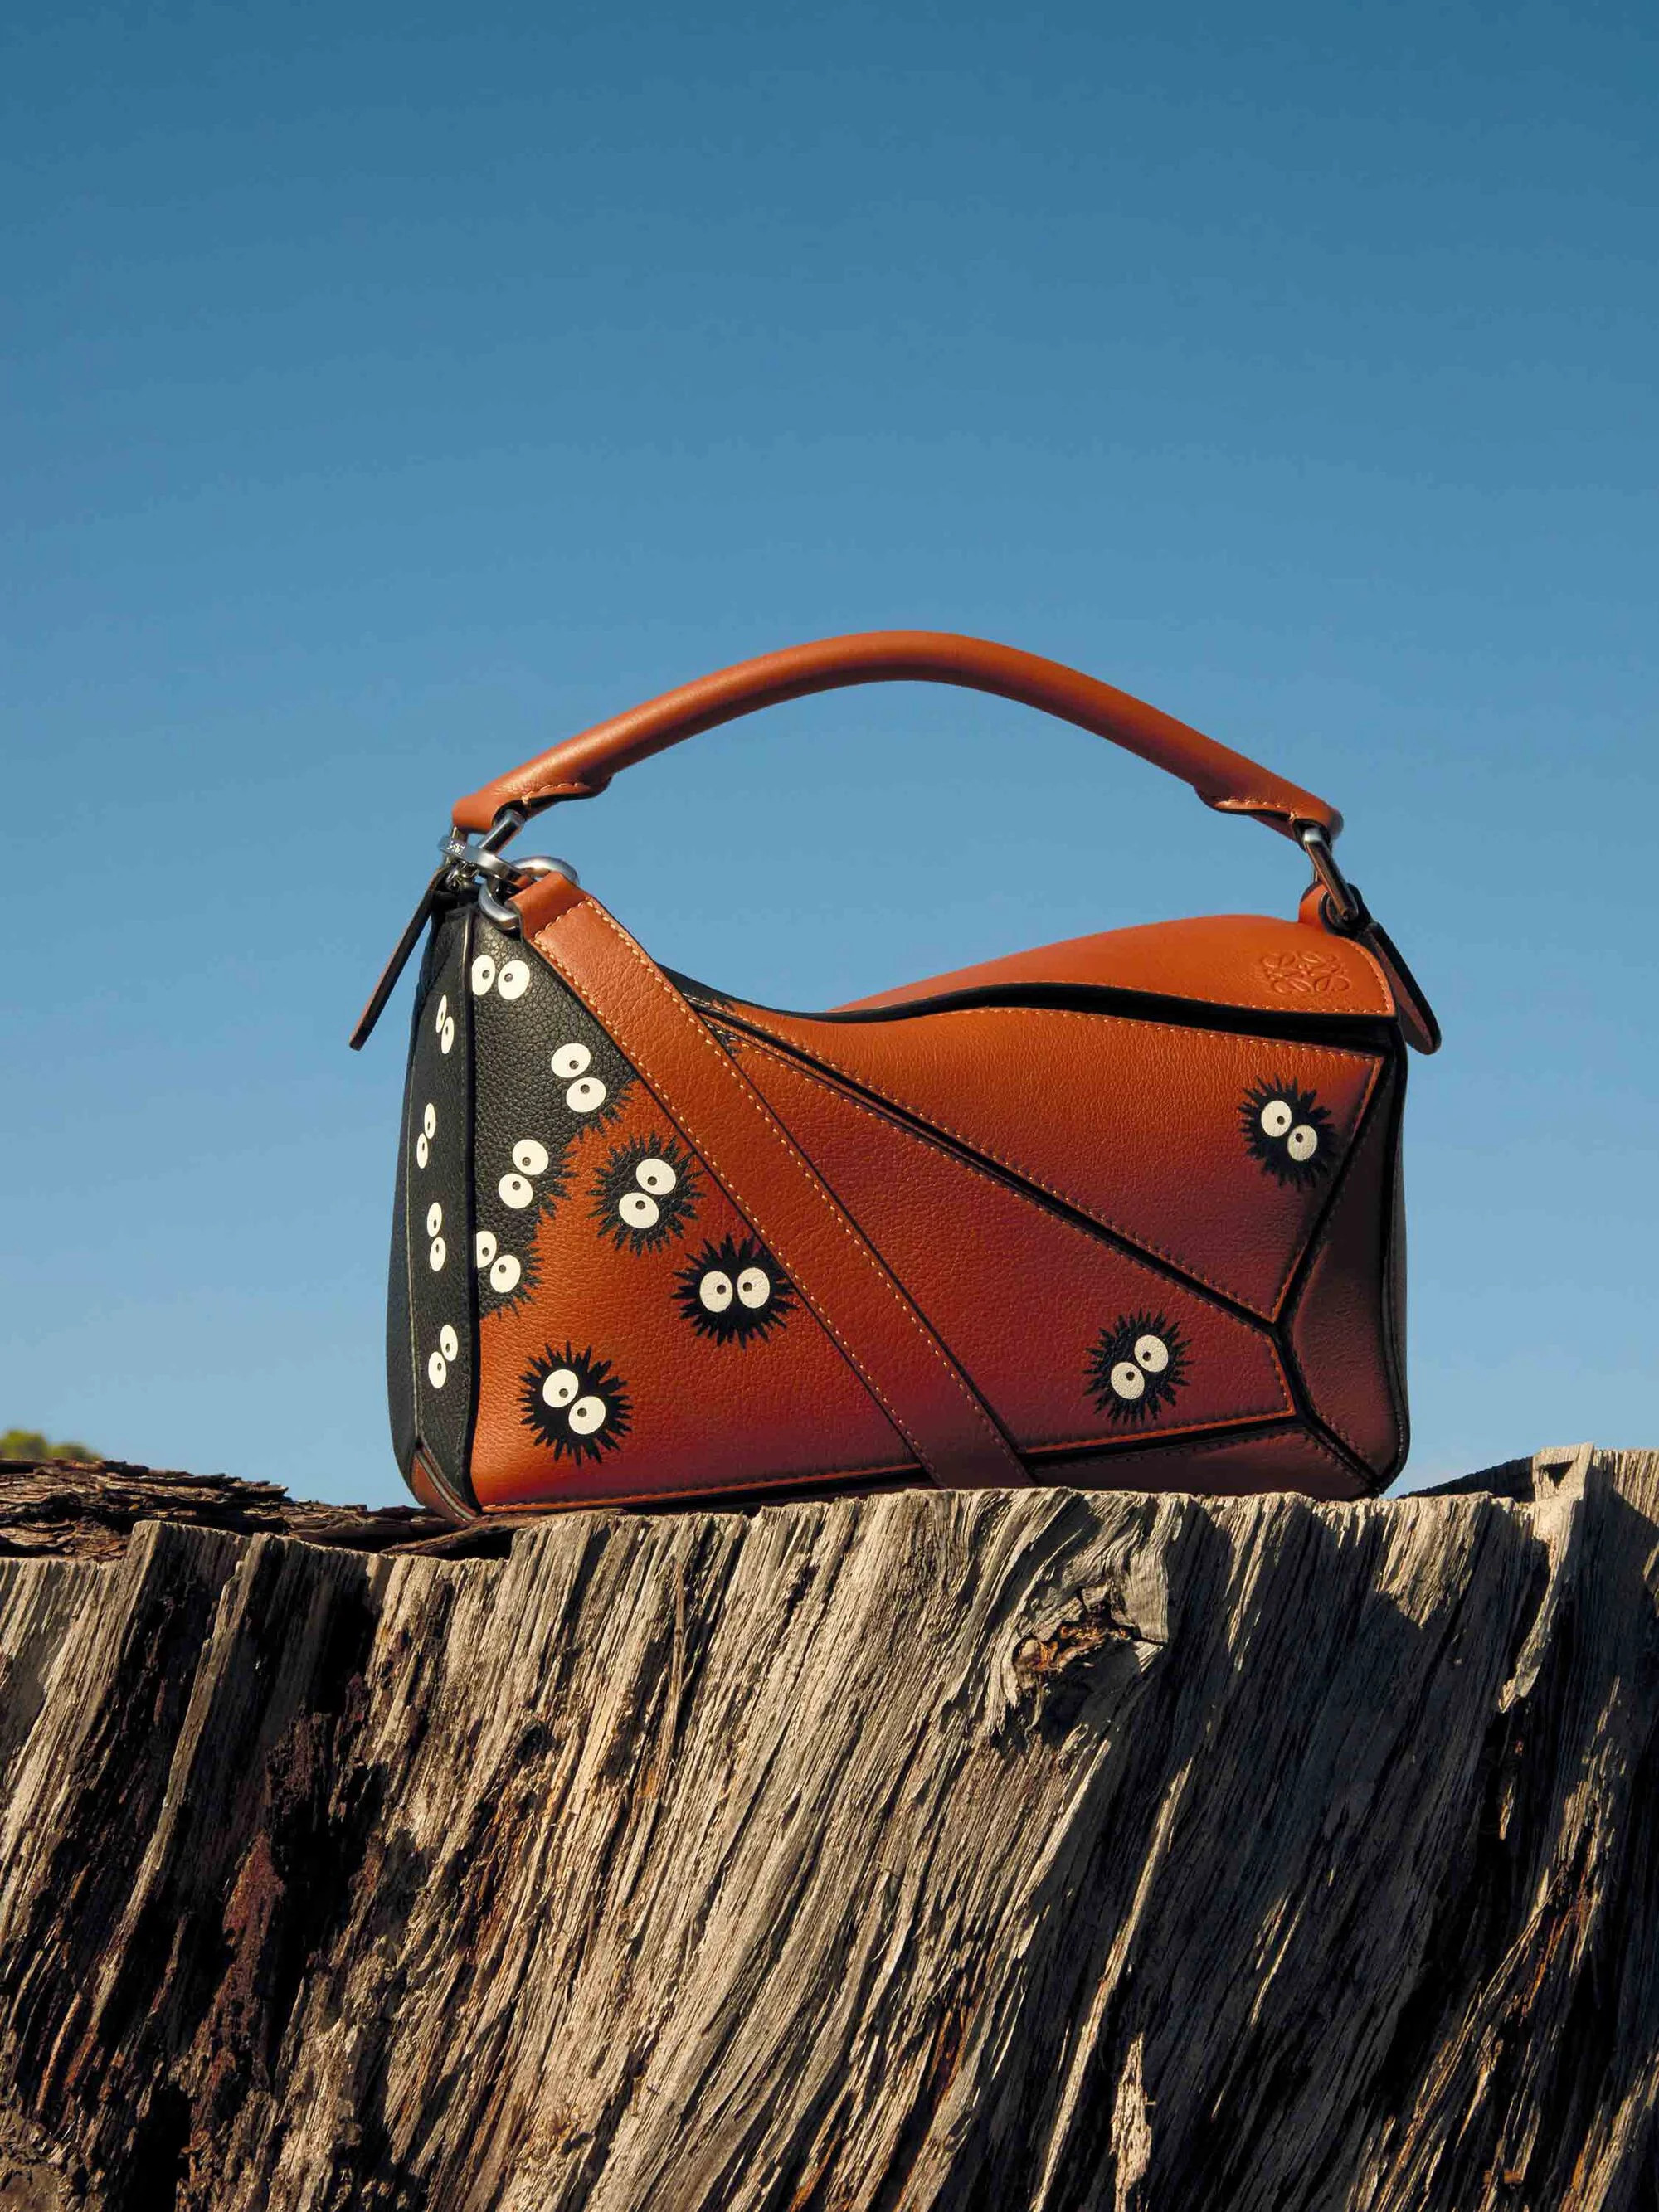 Luxury Spanish leather designer Loewe releases limited edition My 